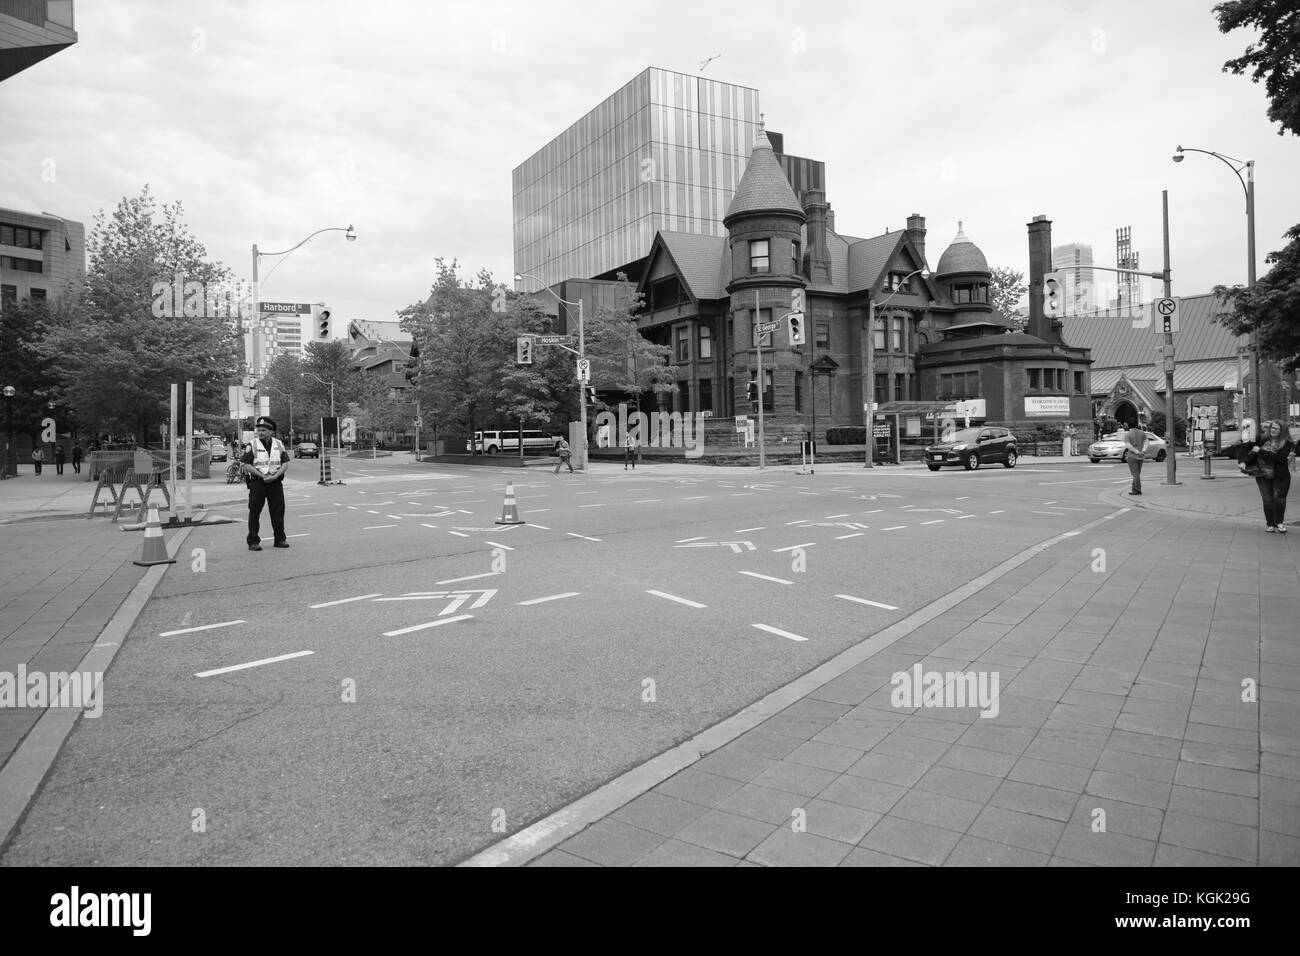 A sparsely-filled Toronto intersection. Just a simple attempt at capturing a pocket of quiet life in a city bustling with noise. Stock Photo